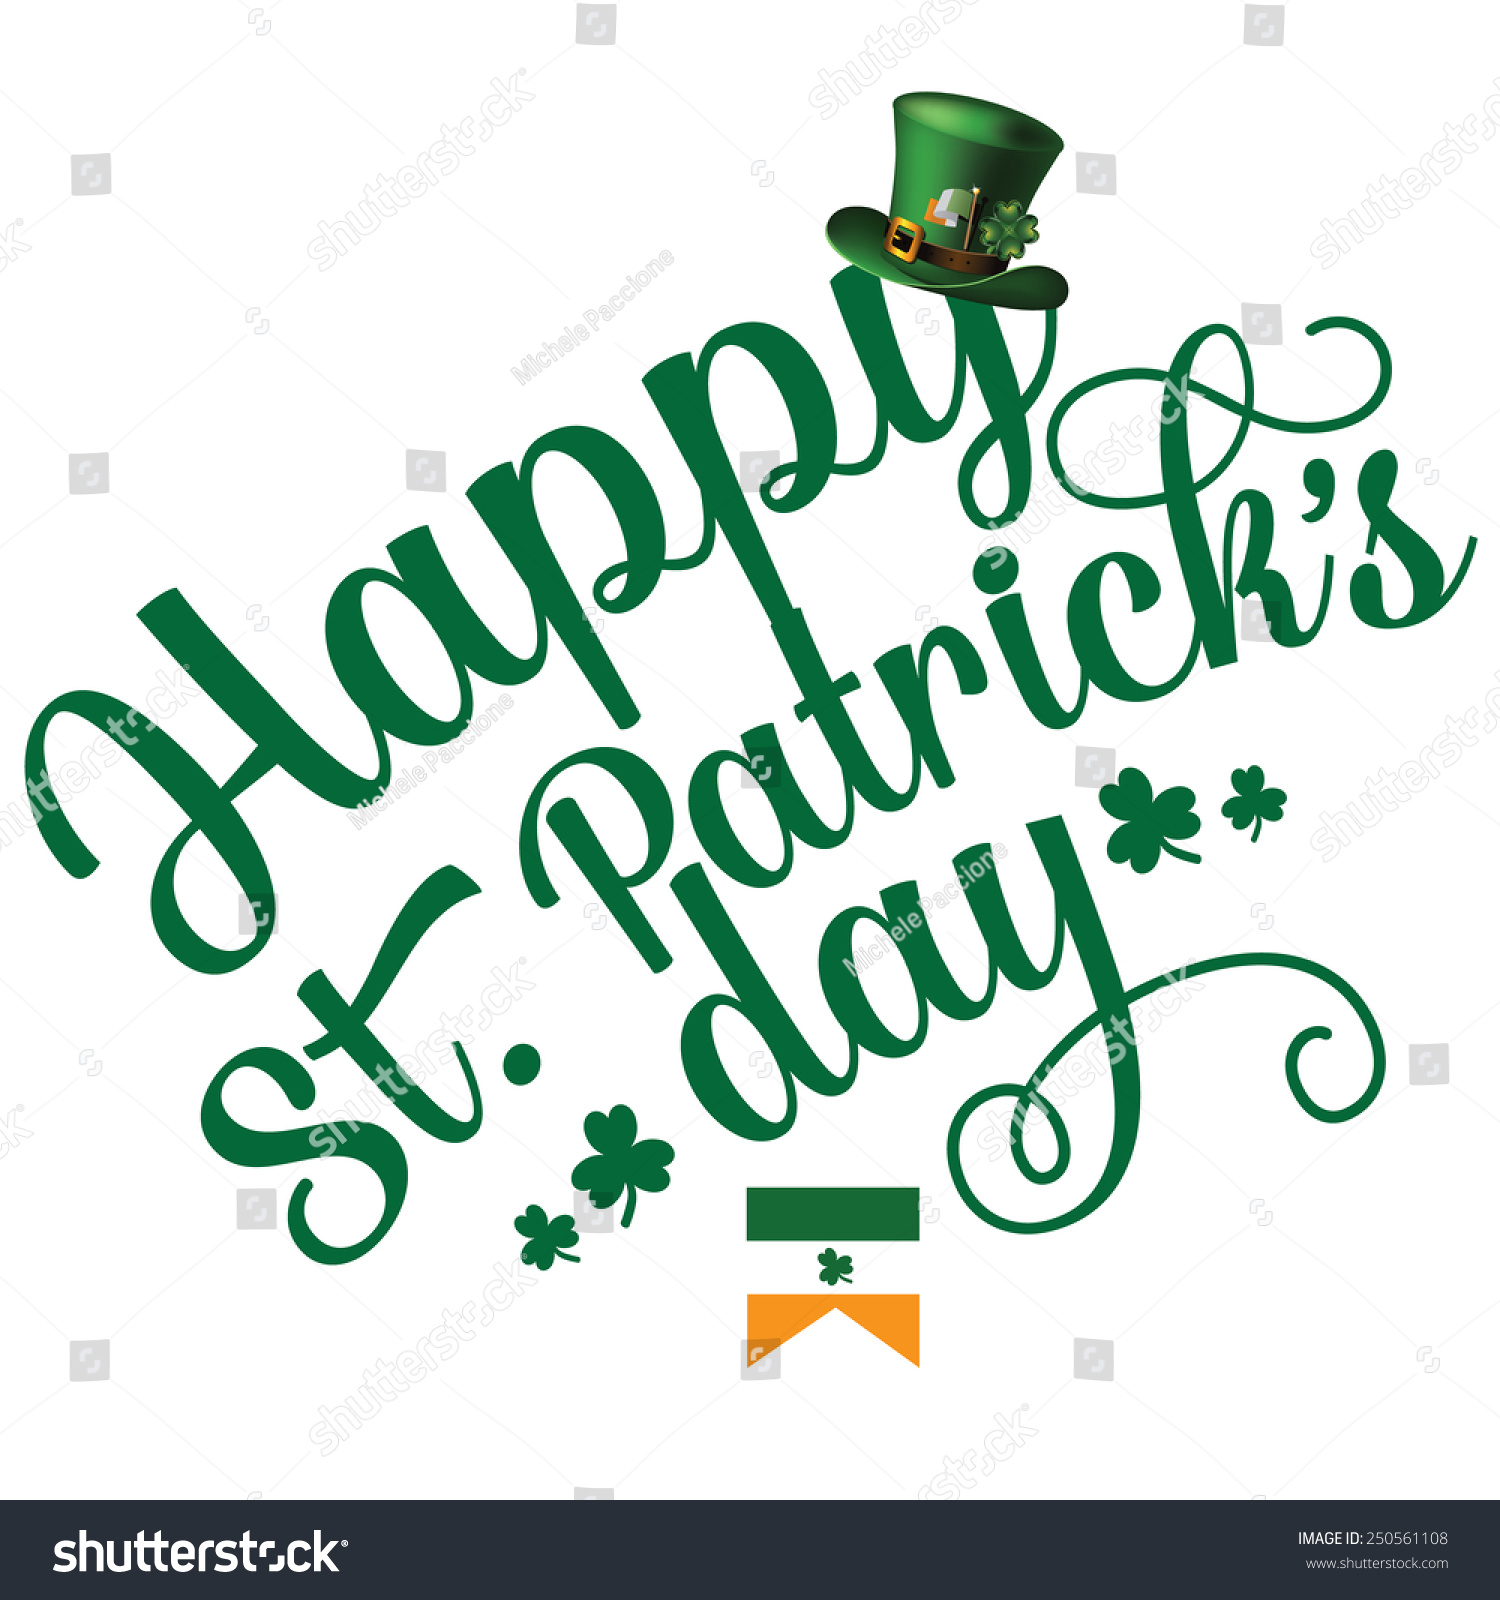 Happy St PatrickÃ¢Â?Â?s Day cheerful text design royalty free stock illustration  perfect for ads, poster, flier, signage, promotion, greeting card, blog #250561108